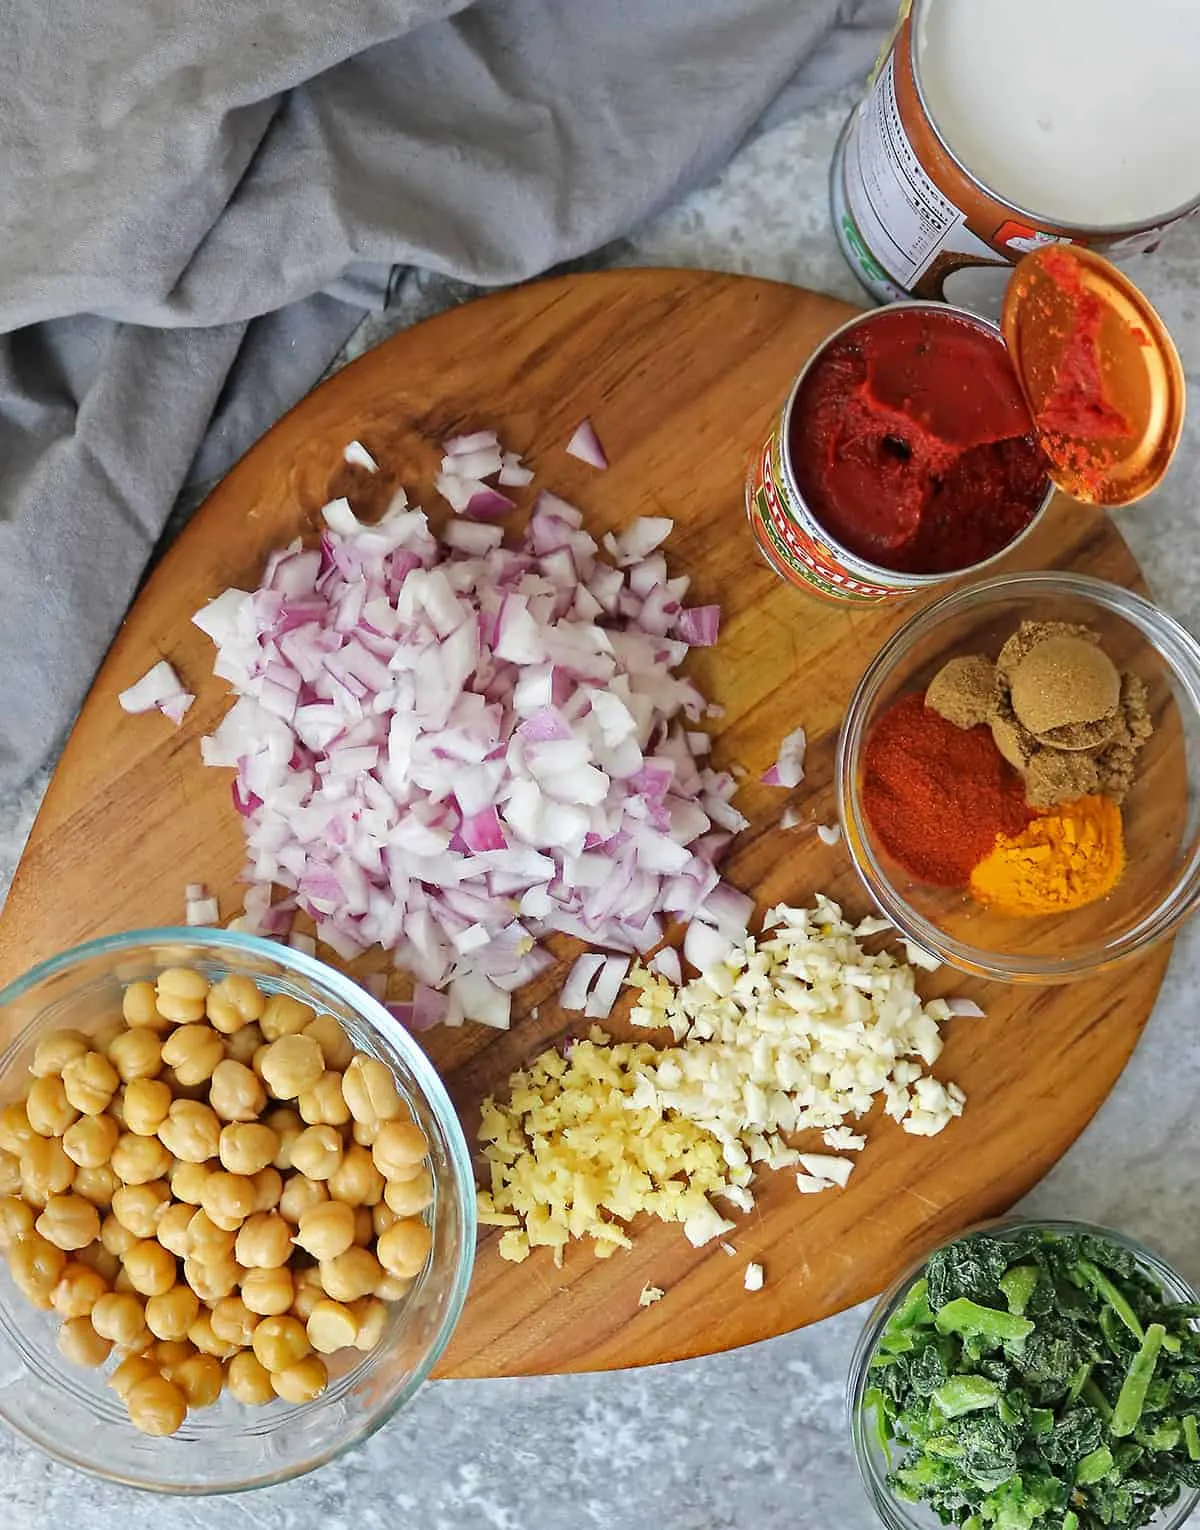 All the Ingredients to make chickpea spinach curry